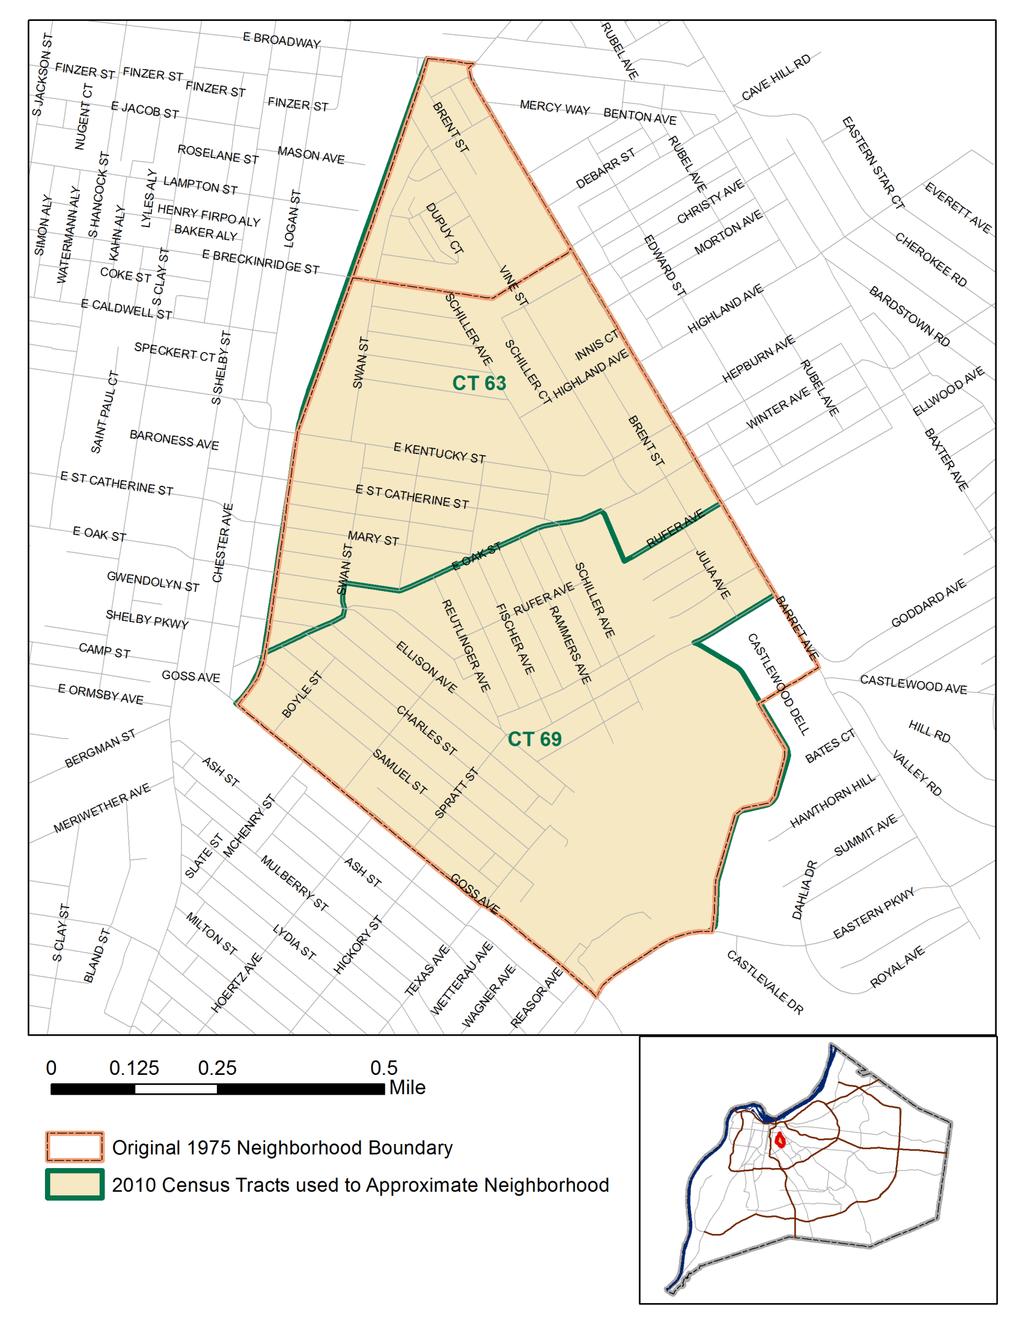 Because census tract boundaries align fairly well with the urban neighborhood boundaries, this data profile uses 2010 census tract boundaries to approximate the